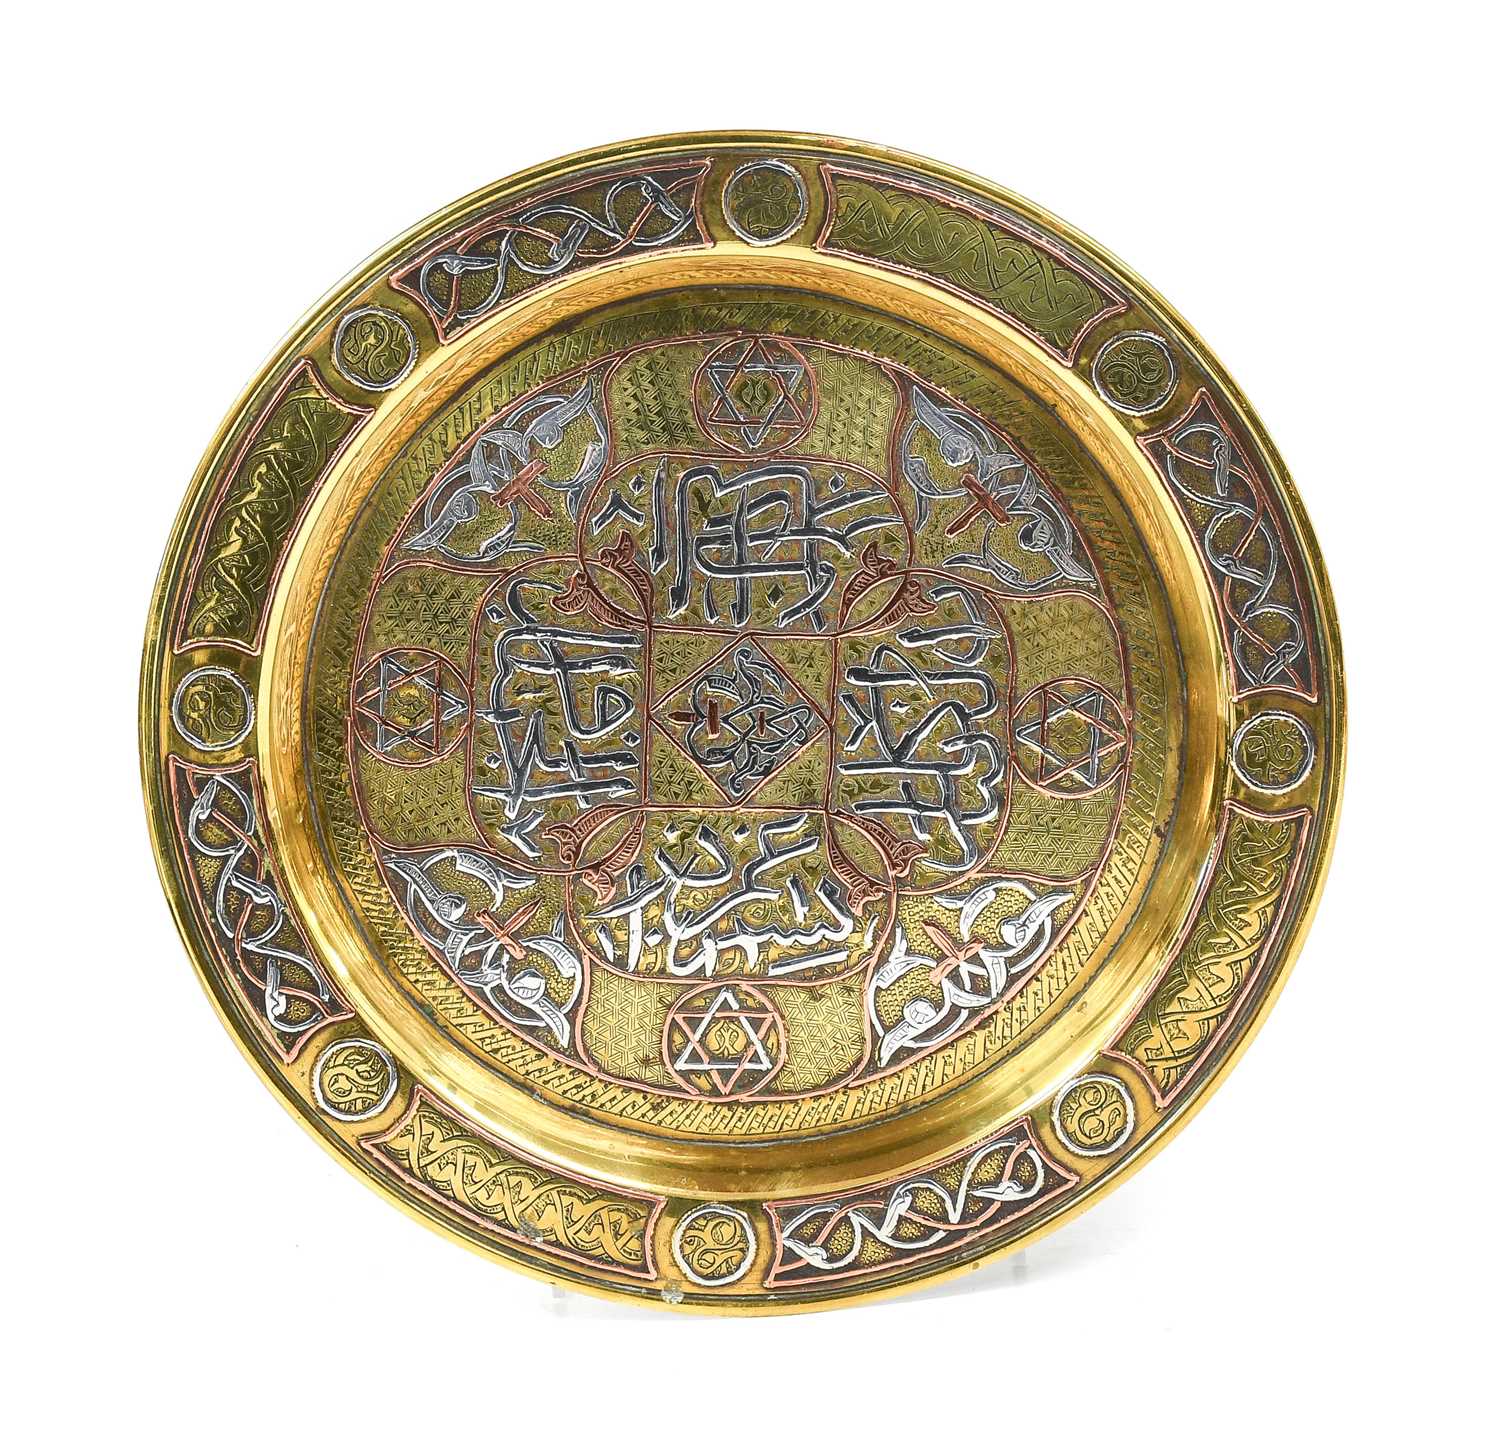 A Cairoware Circular Tray, late 19th/20th century, inlaid in copper and silver with a central - Bild 2 aus 5